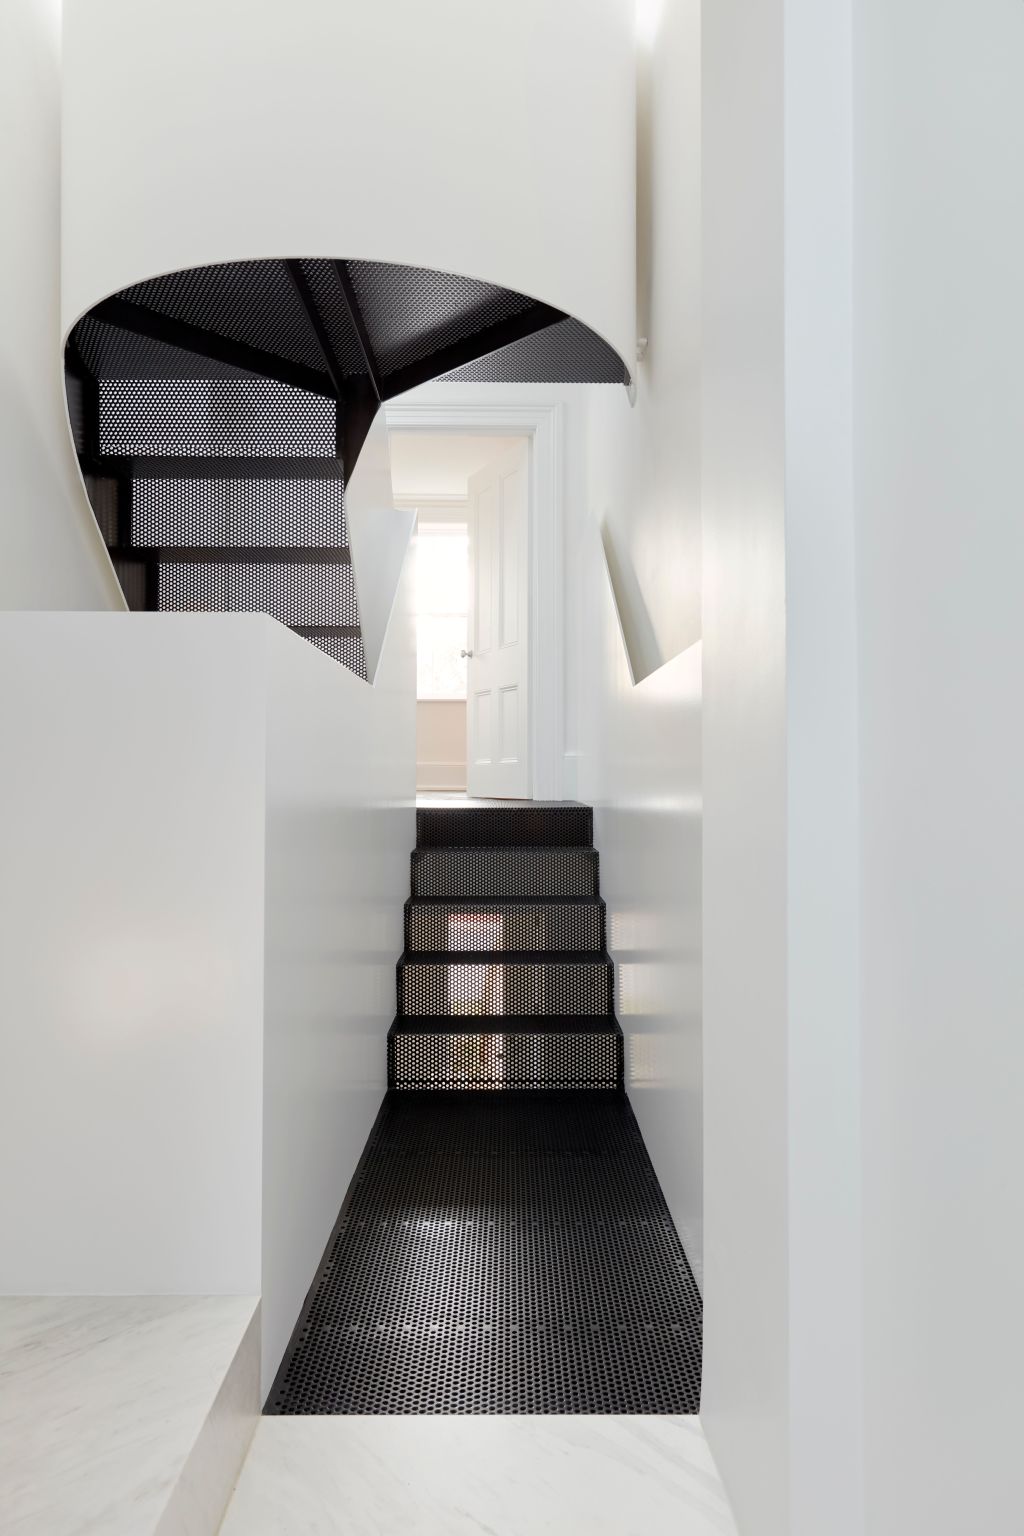 Winding up to the attic room, the perforated staircase is shaped as a sculptural ribbon. Photo: Tom Ross